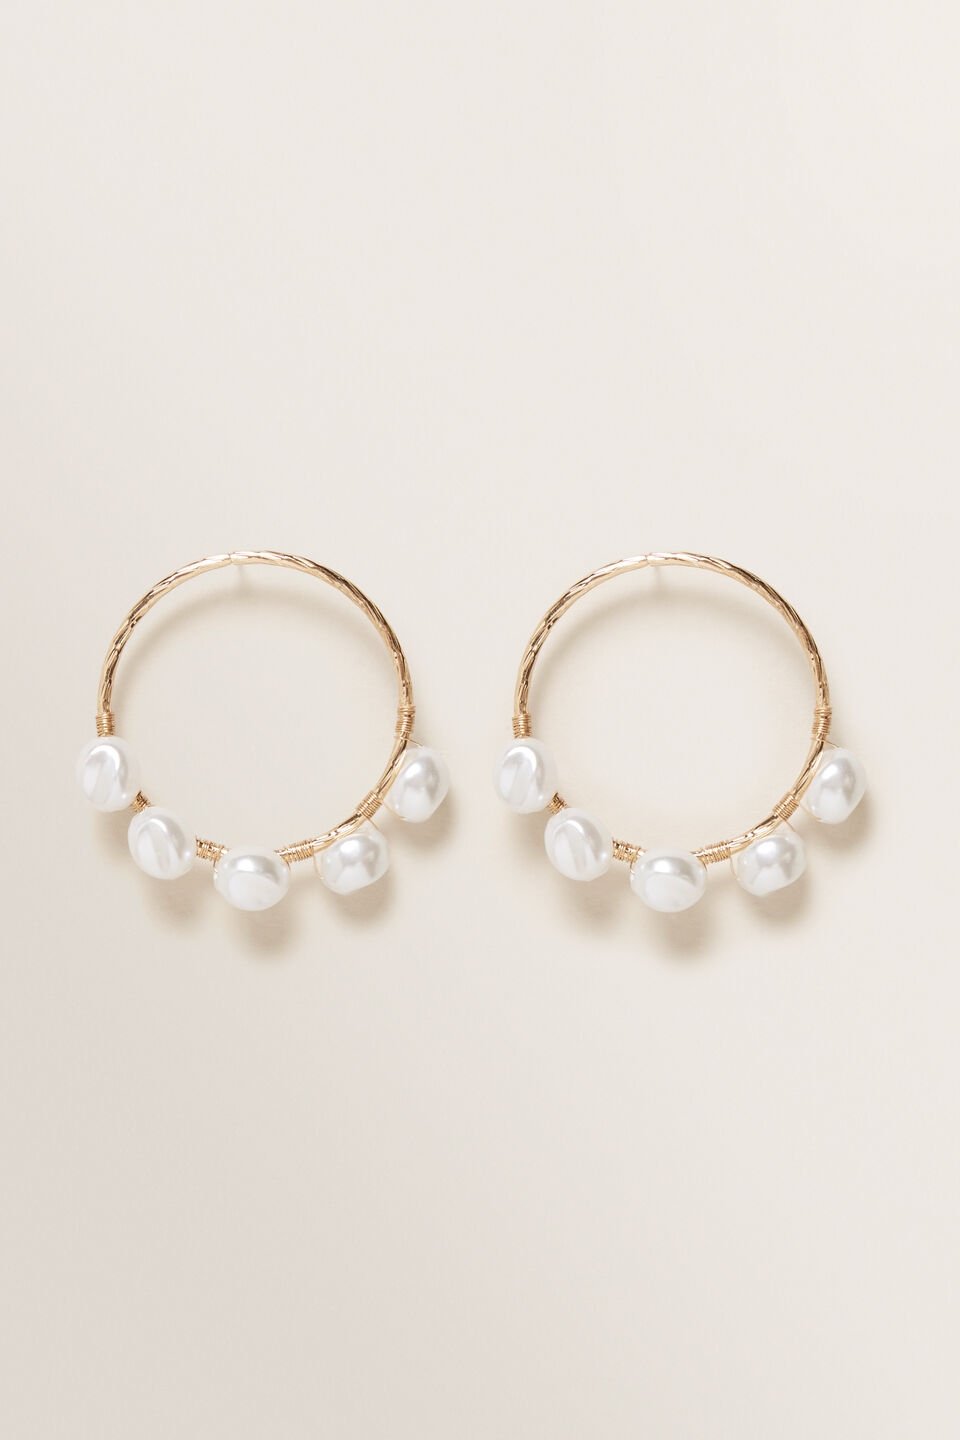 Front Facing Pearl Earrings  Gold